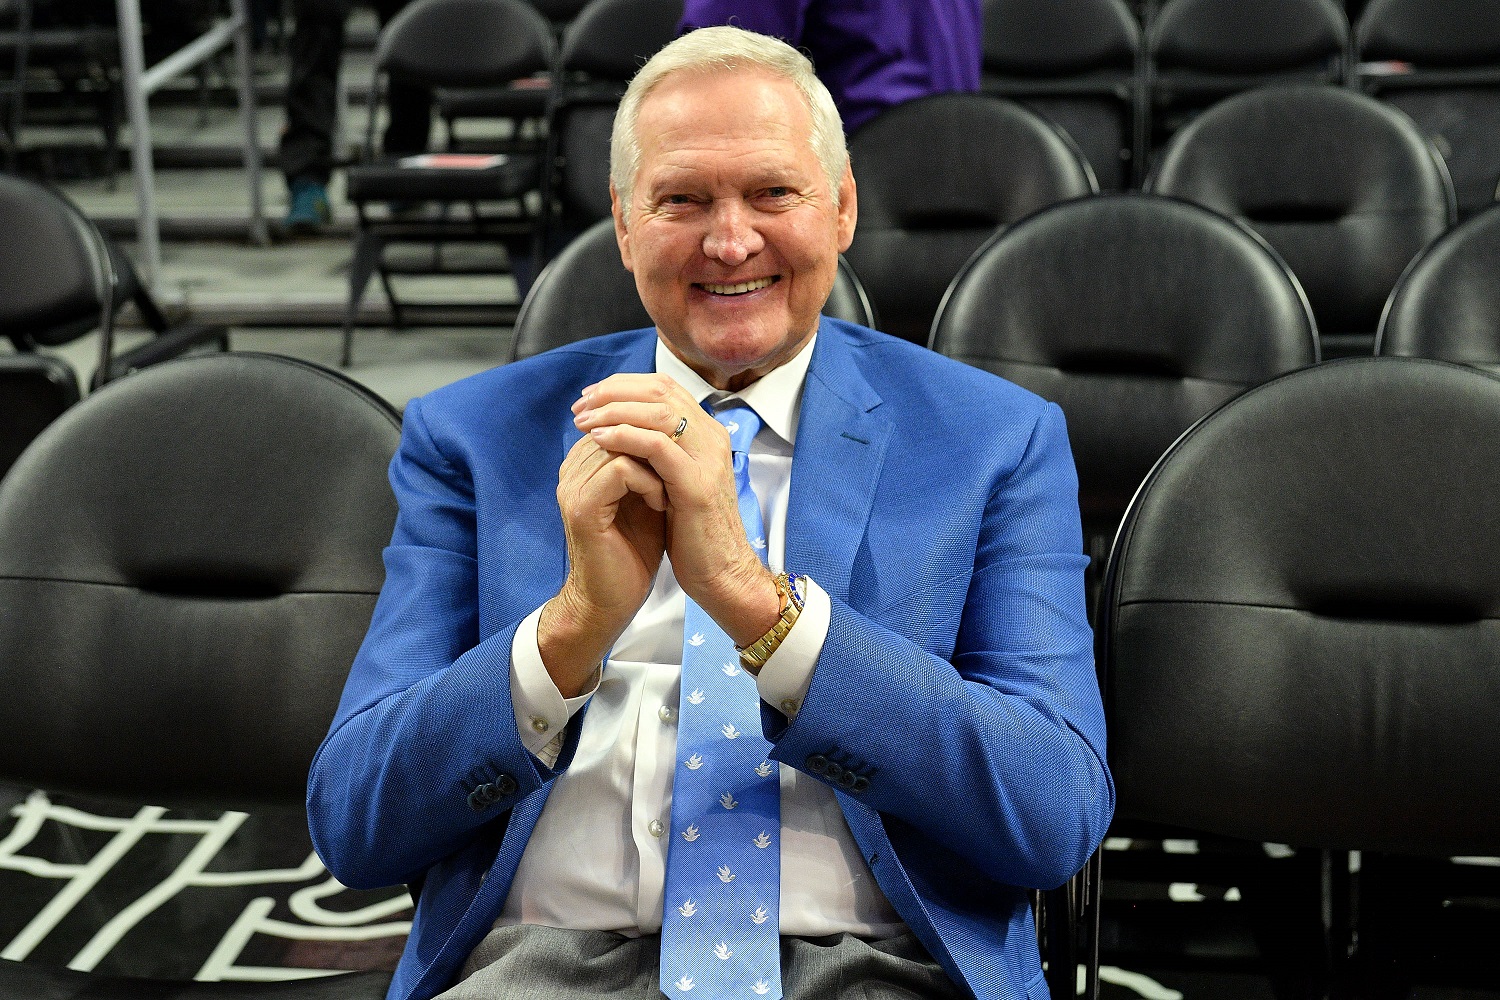 Jerry West Is 82 Years Old and Just Dunked on Lakers Owner Jeanie Buss